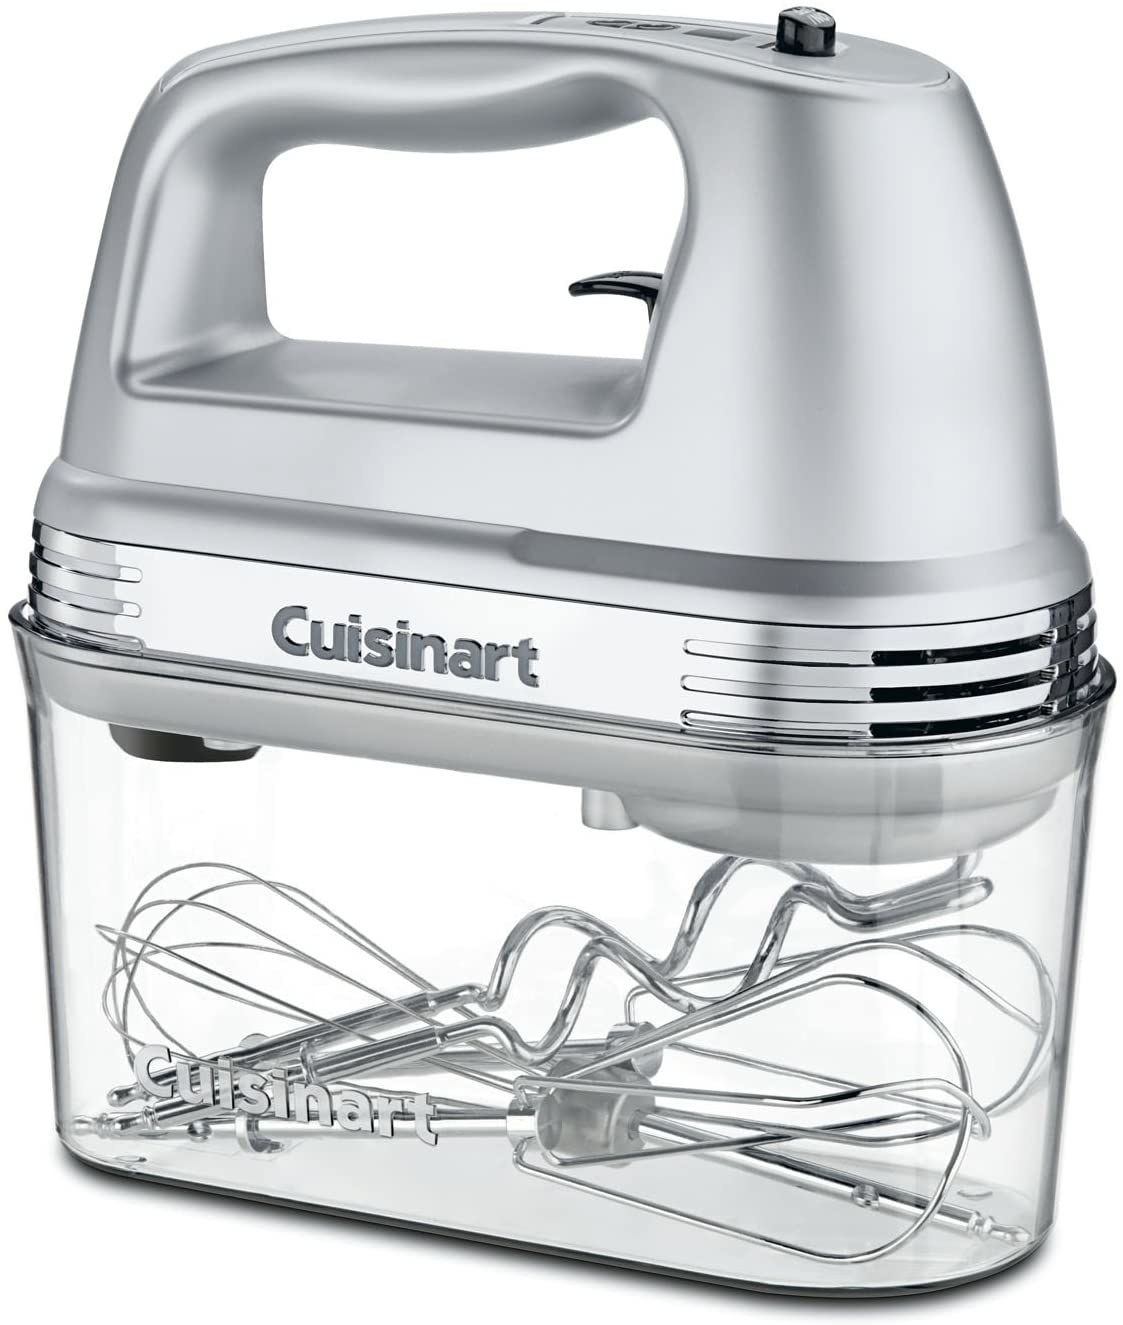 Cuisinart Handheld Mixer and Clear Case